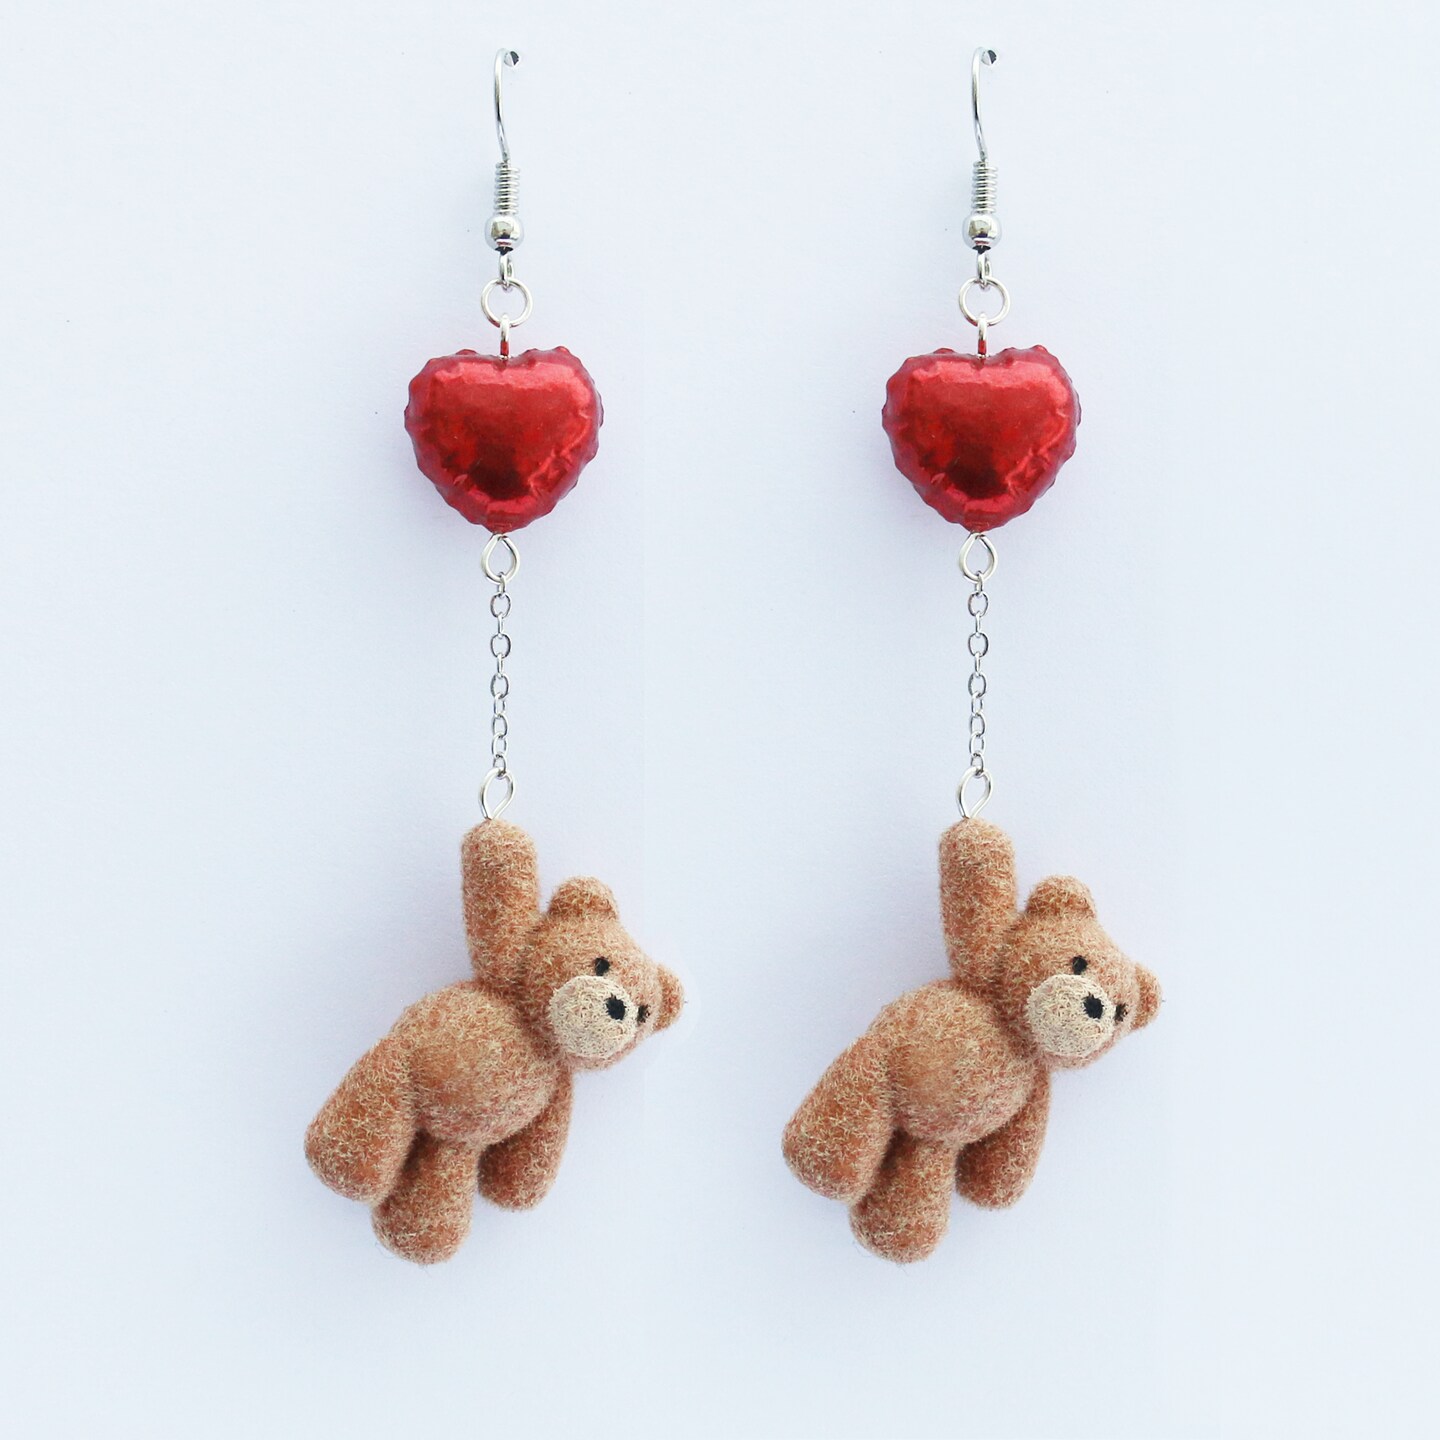 Teddy Bear Holding Heart Balloon Earrings - Miniature Jewelry - Valentine  Gift Ideas - Valentine\'s Day Gift For Girlfriend Wife Fiance Her |  MakerPlace by Michaels